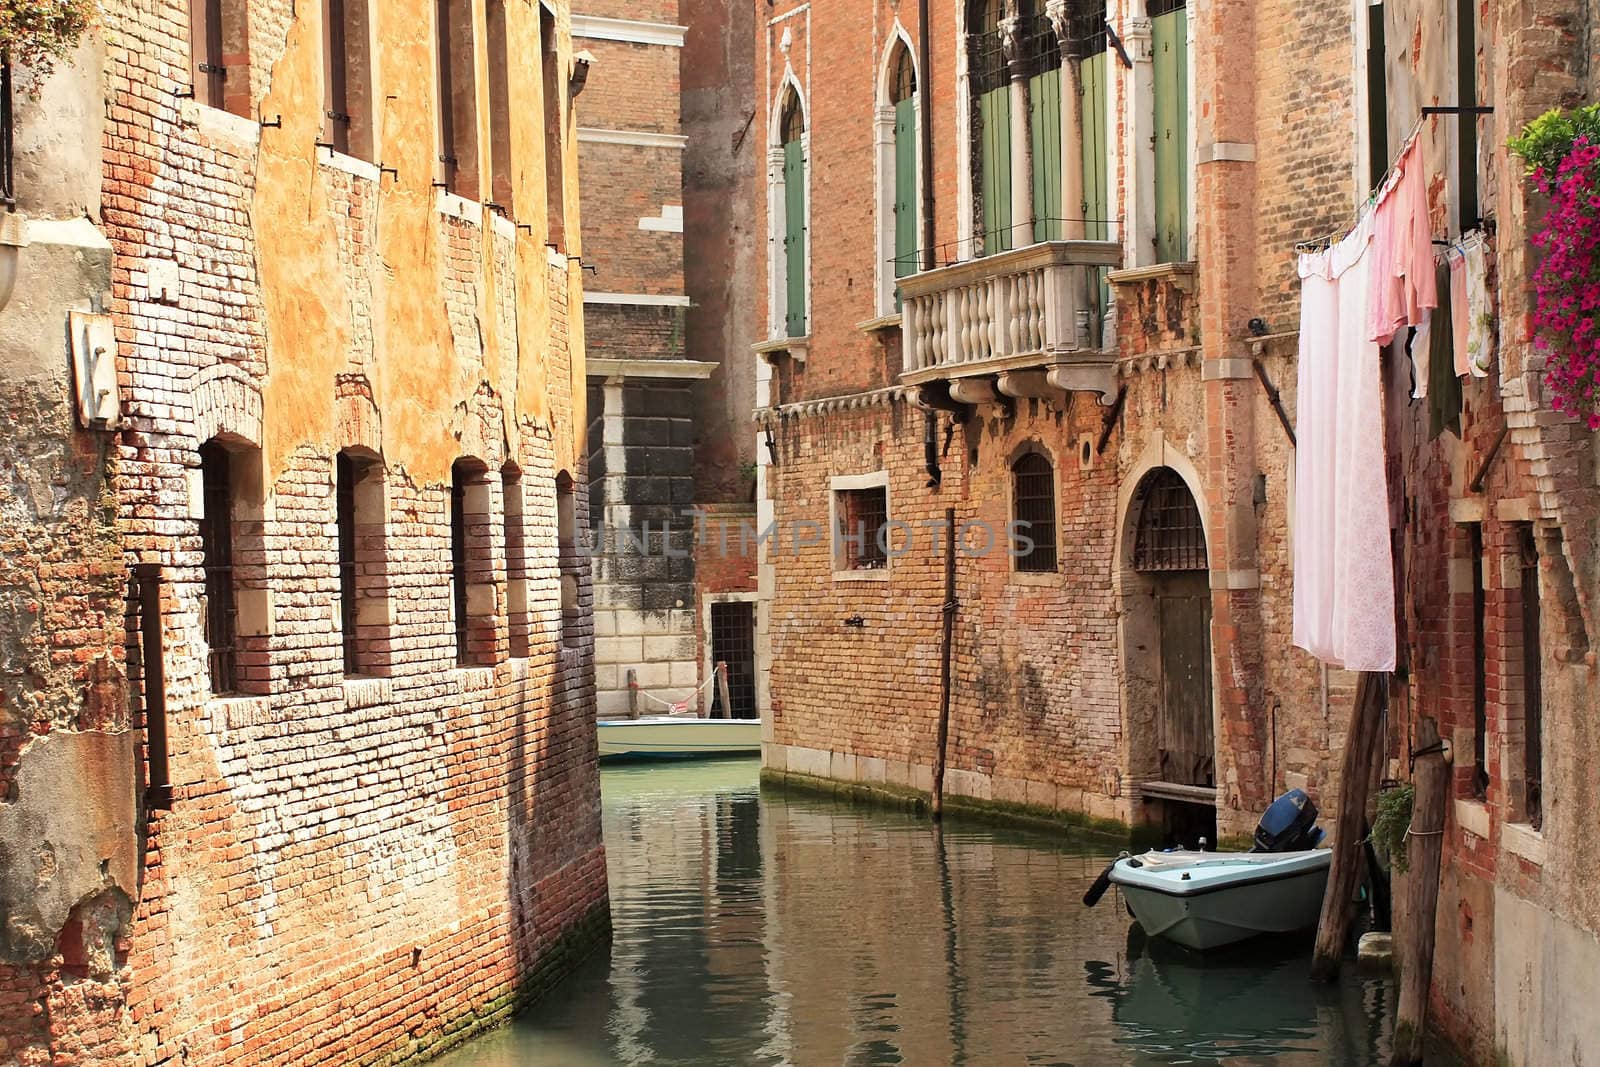 The canal on outskirts of Venice